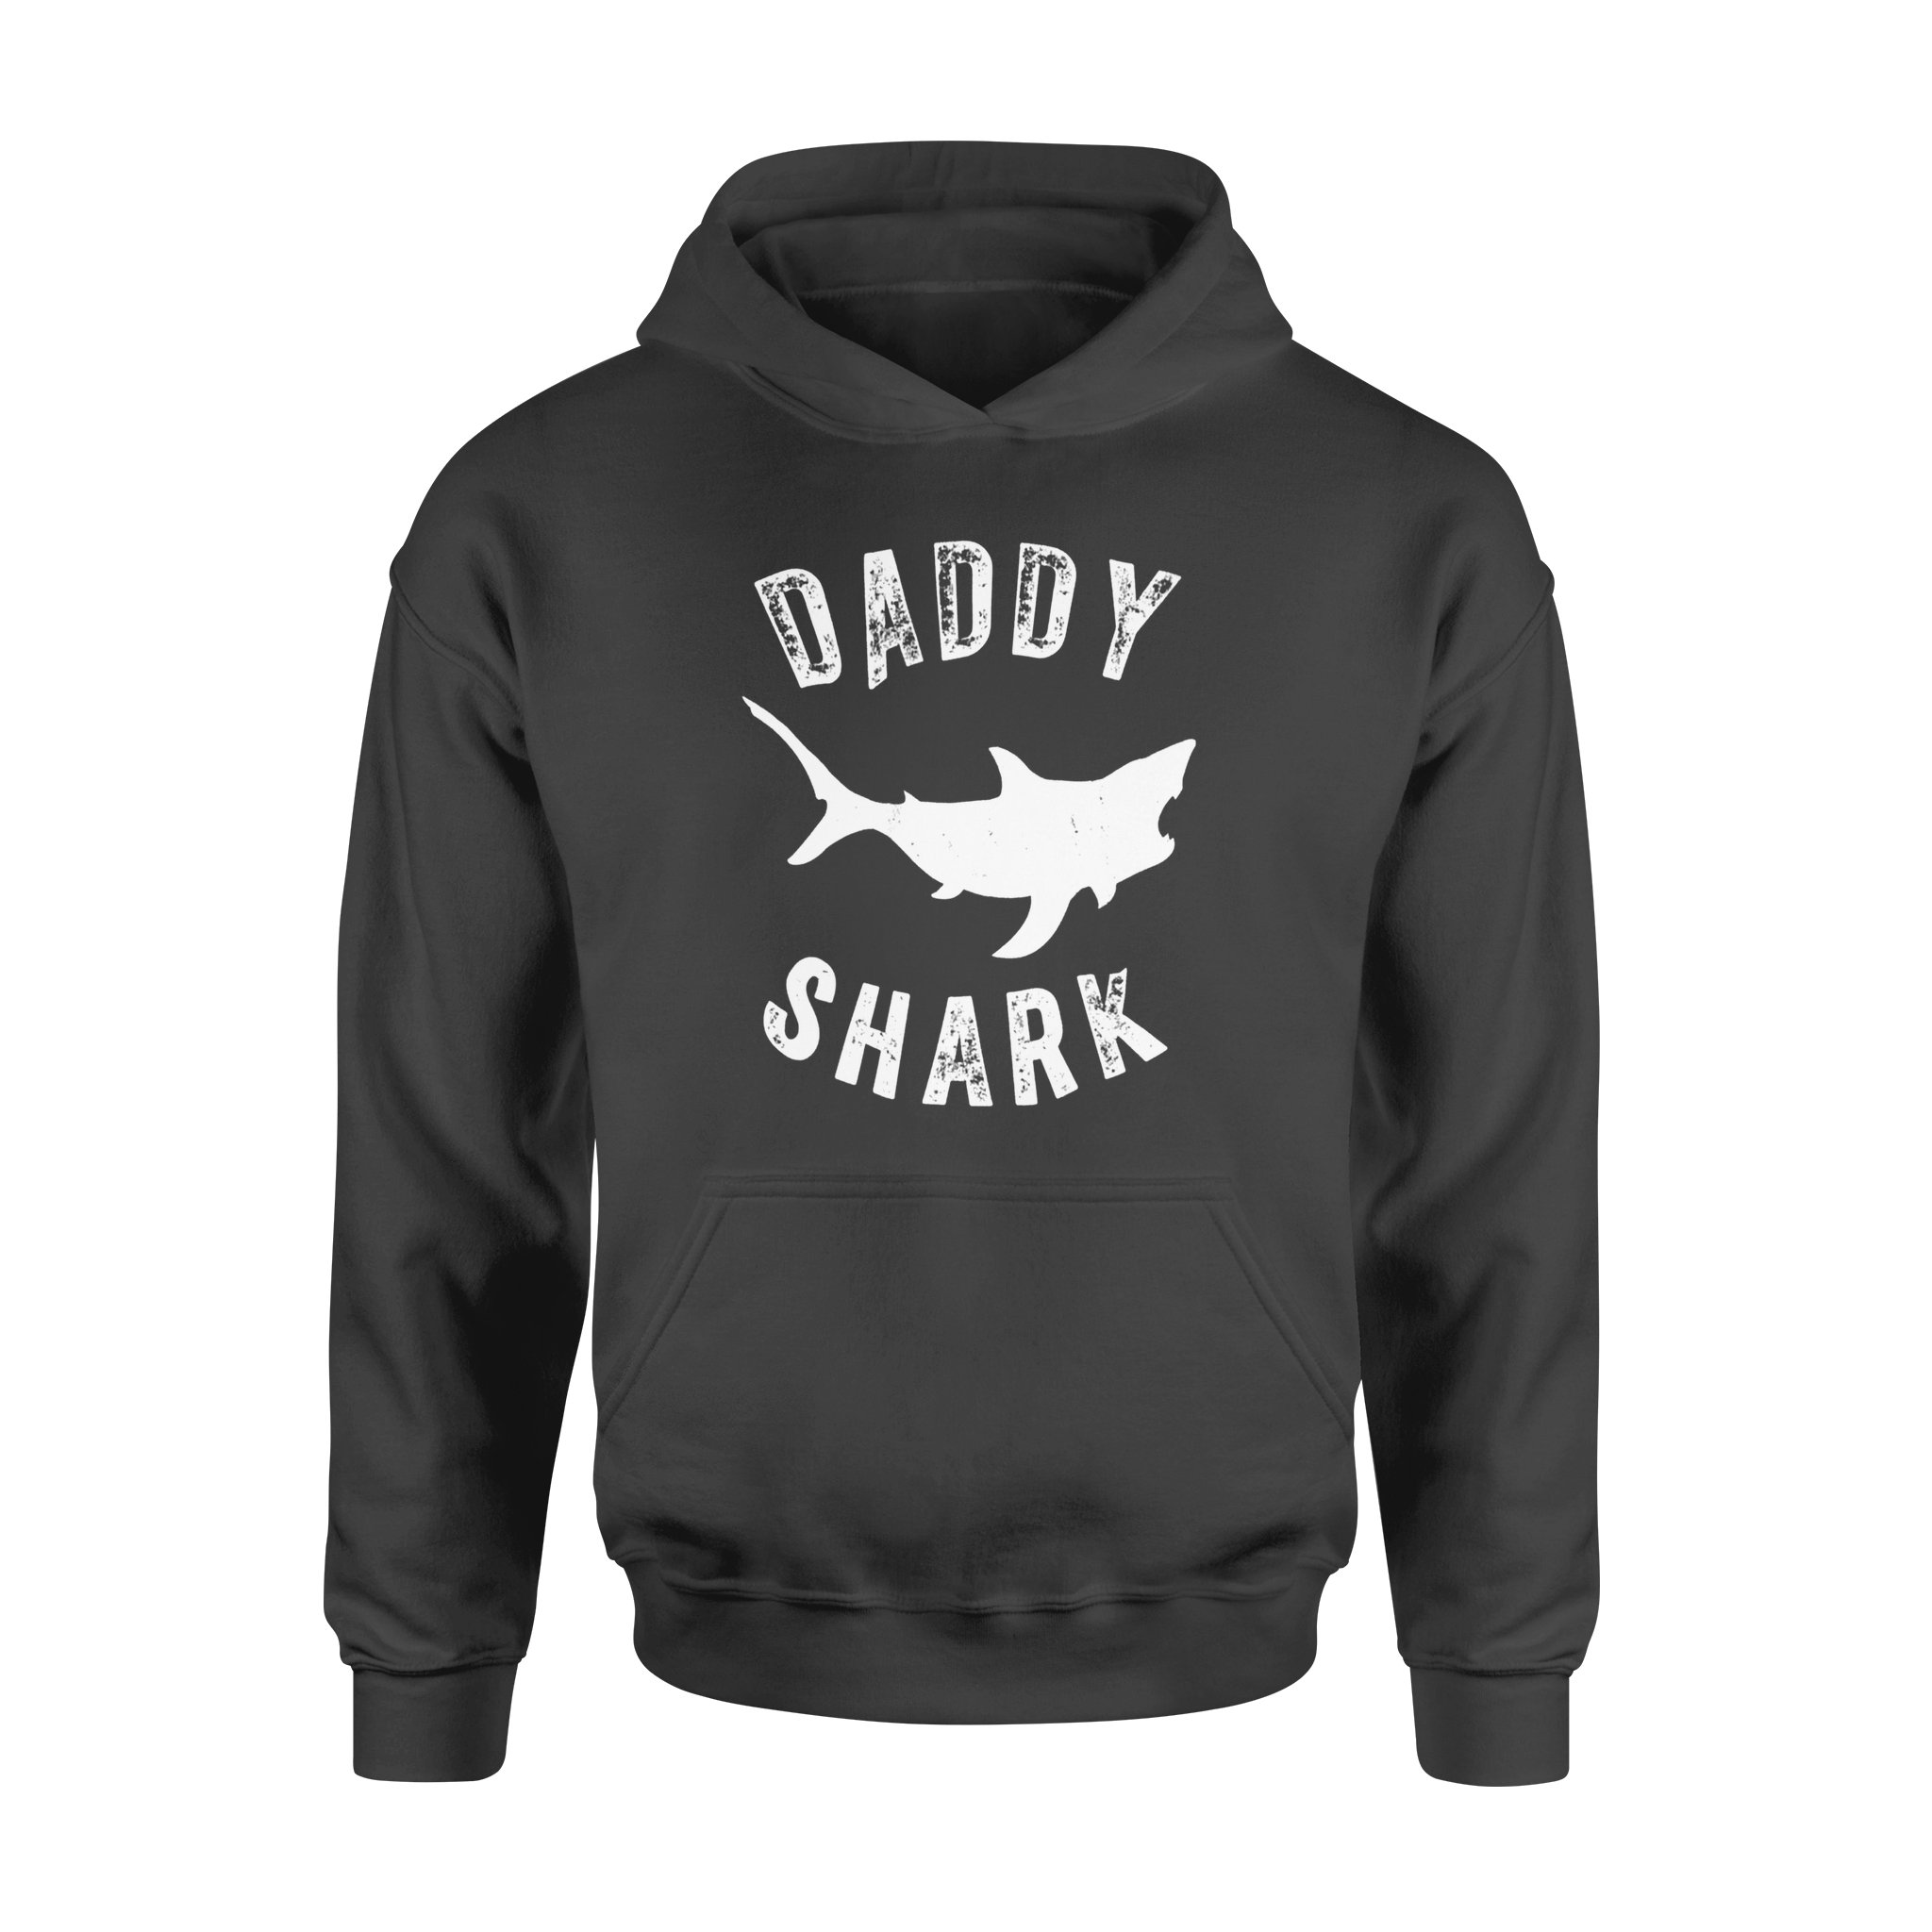 DADDY SHARK , DAD SHIRT,GIFTS FOR DAD,DAD GIFTS,FATHER?S DAY GIFT,GIFT FOR MEN SHIRT,PLUS SIZE SHIRT